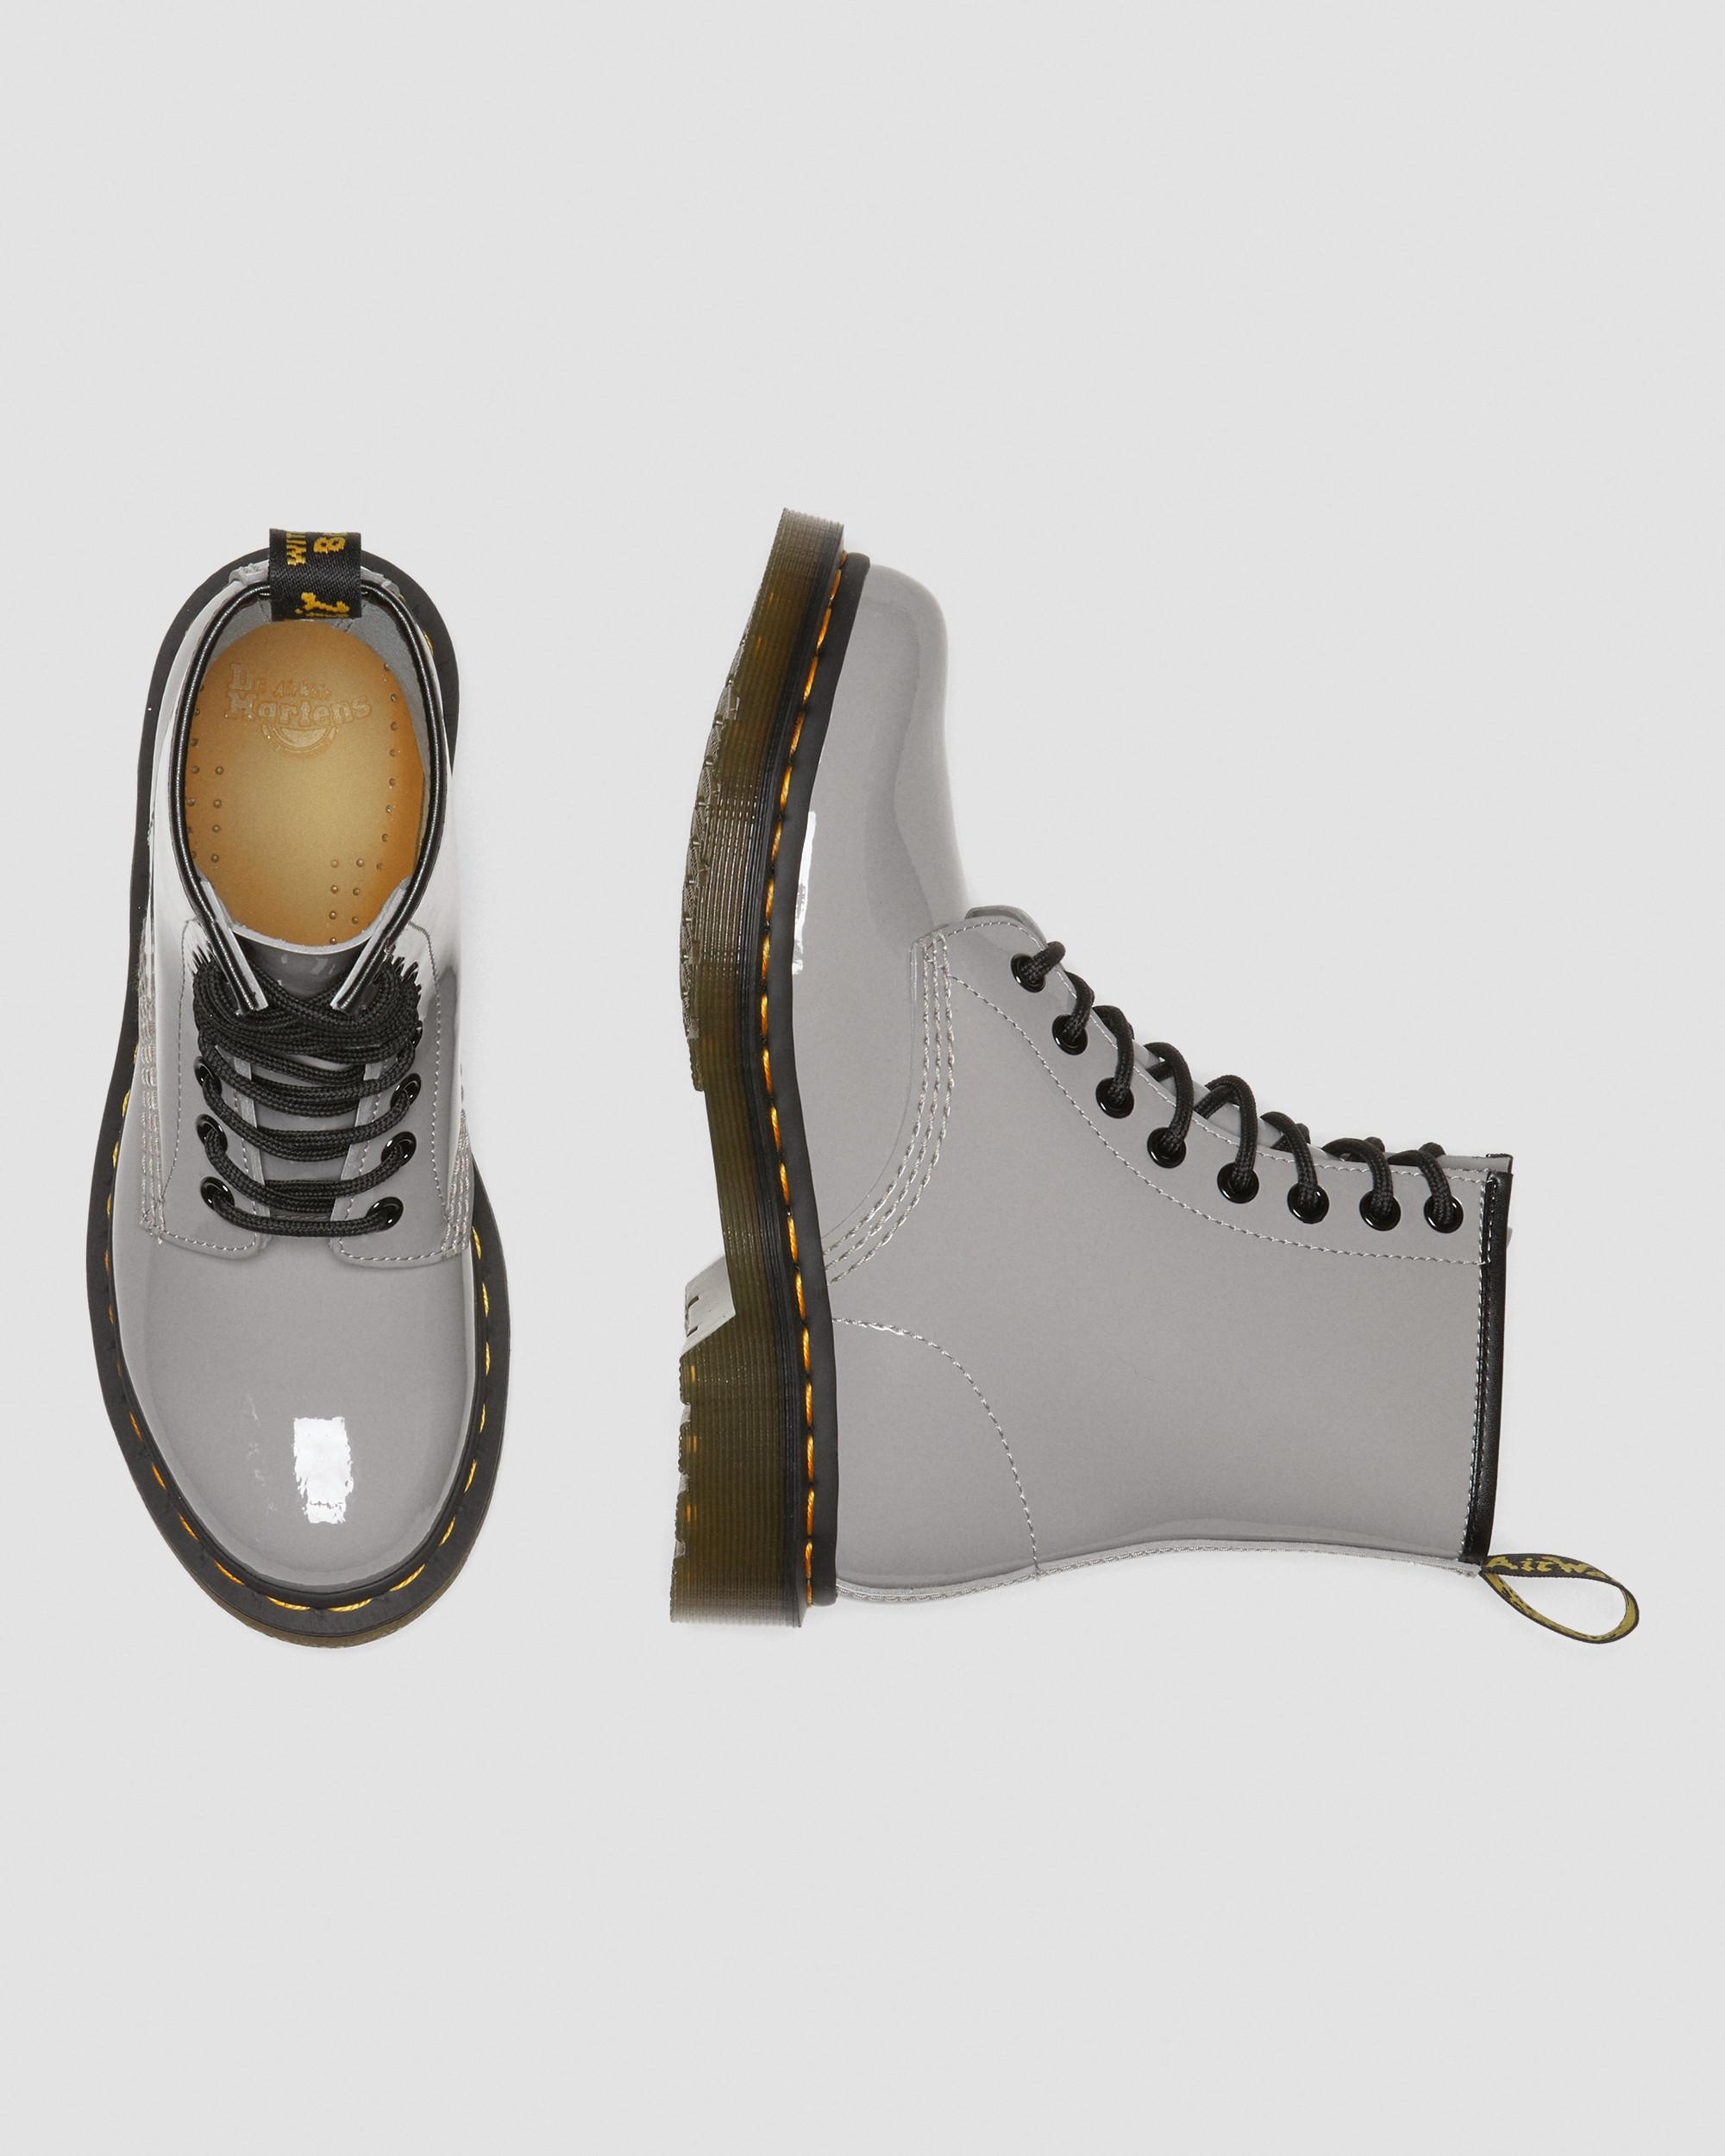 DR MARTENS 1460 Women's Patent Leather Lace Up Boots